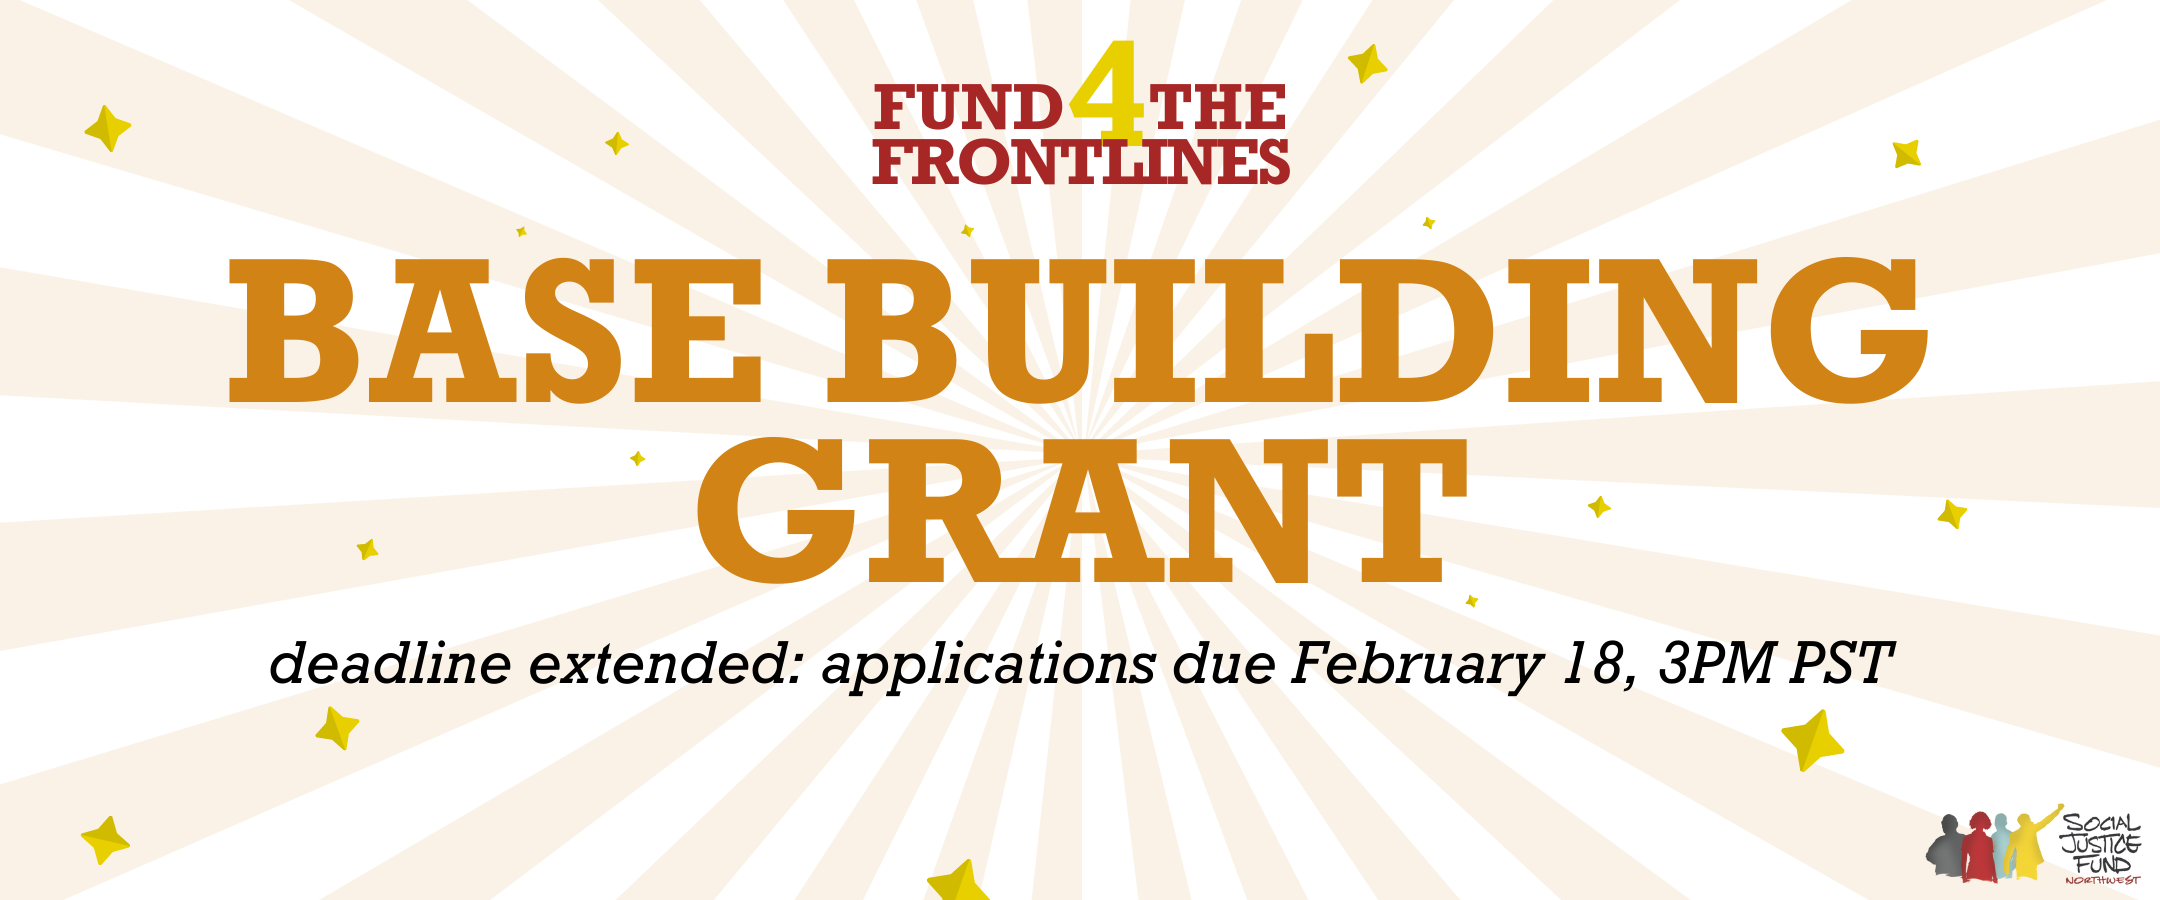 Rectangular banner with a light orange sunburst and little yellow stars radiating from center. Text reads Fund 4 the Frontlines Base Building Grant. Applications due February 18 3PM PST